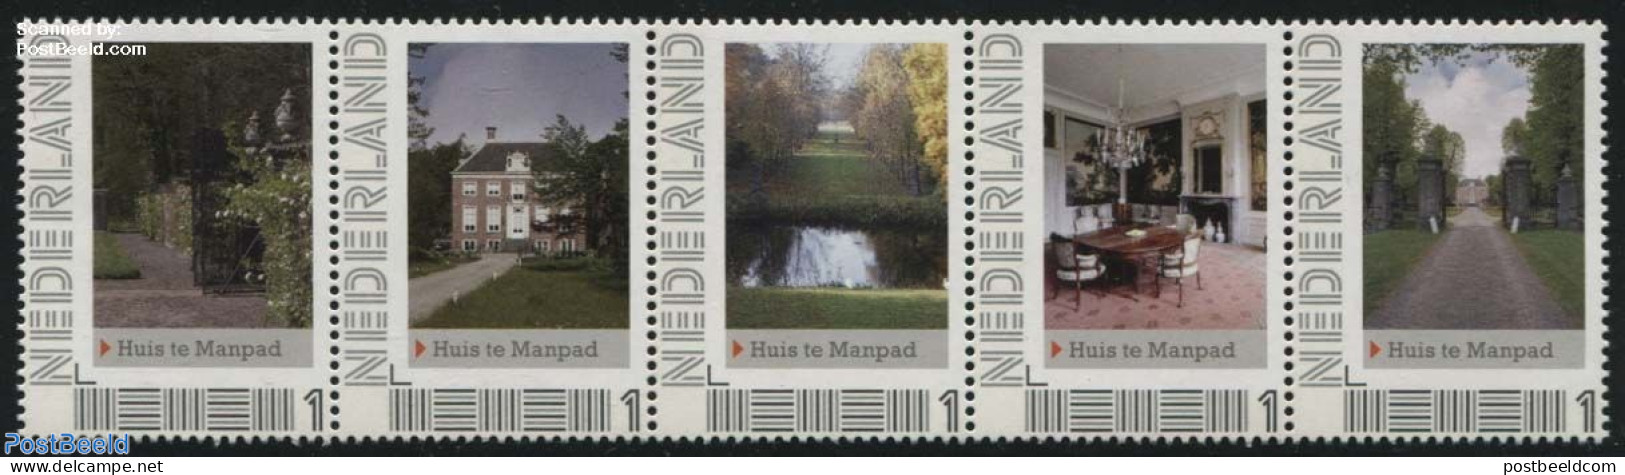 Netherlands - Personal Stamps TNT/PNL 2012 Huis Te Manpad 5v [::::], Mint NH, Castles & Fortifications - Châteaux